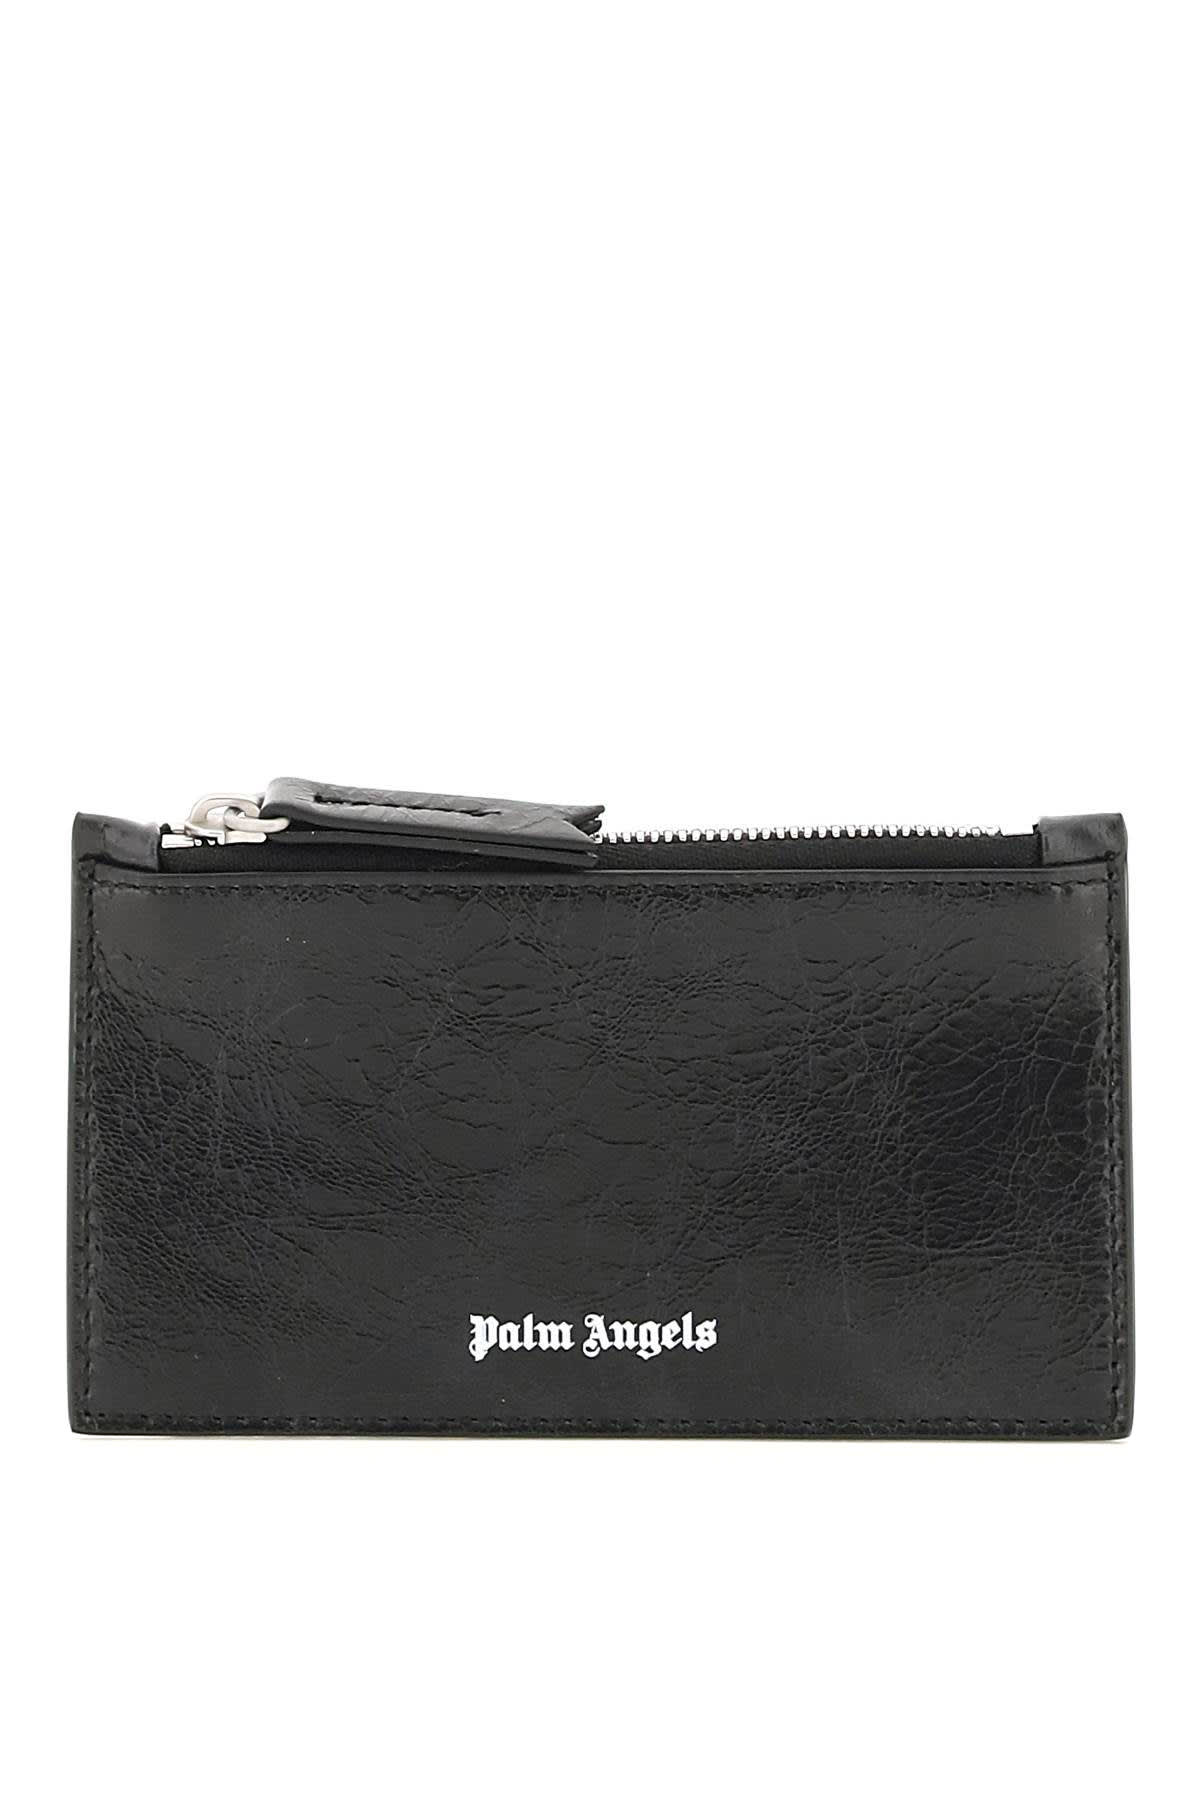 Palm Angels Zipped Cardholder